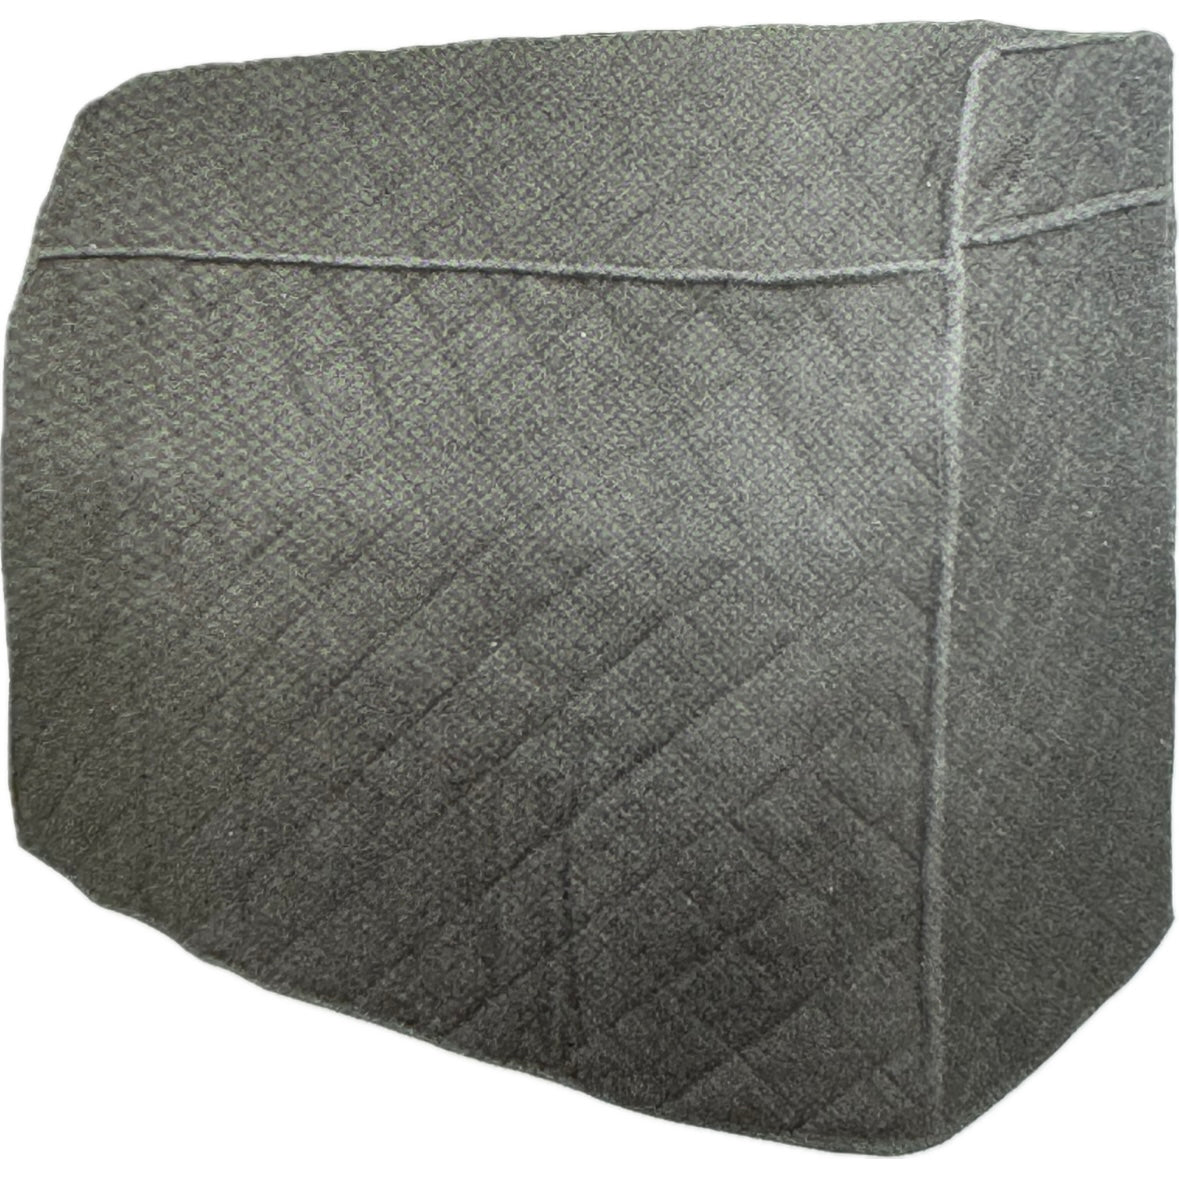 Padded Upright Covers